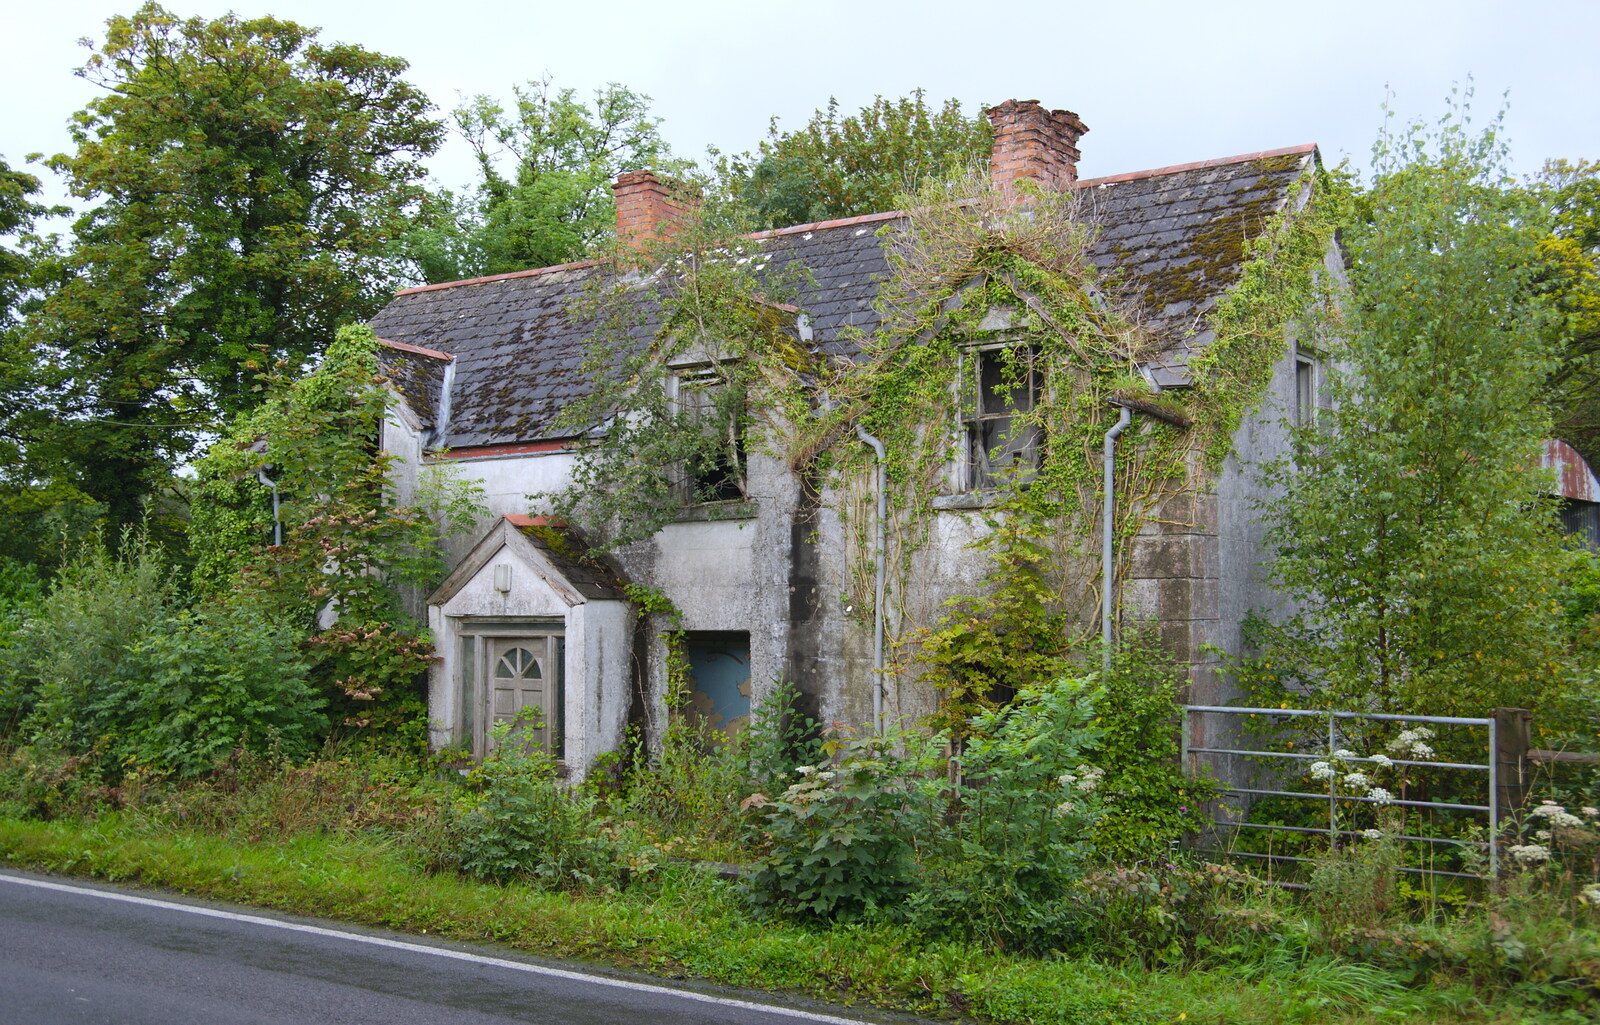 The house is largely consumed by foliage from Travels in the Borderlands: An Blaic/Blacklion to Belcoo and back, Cavan and Fermanagh, Ireland - 22nd August 2019